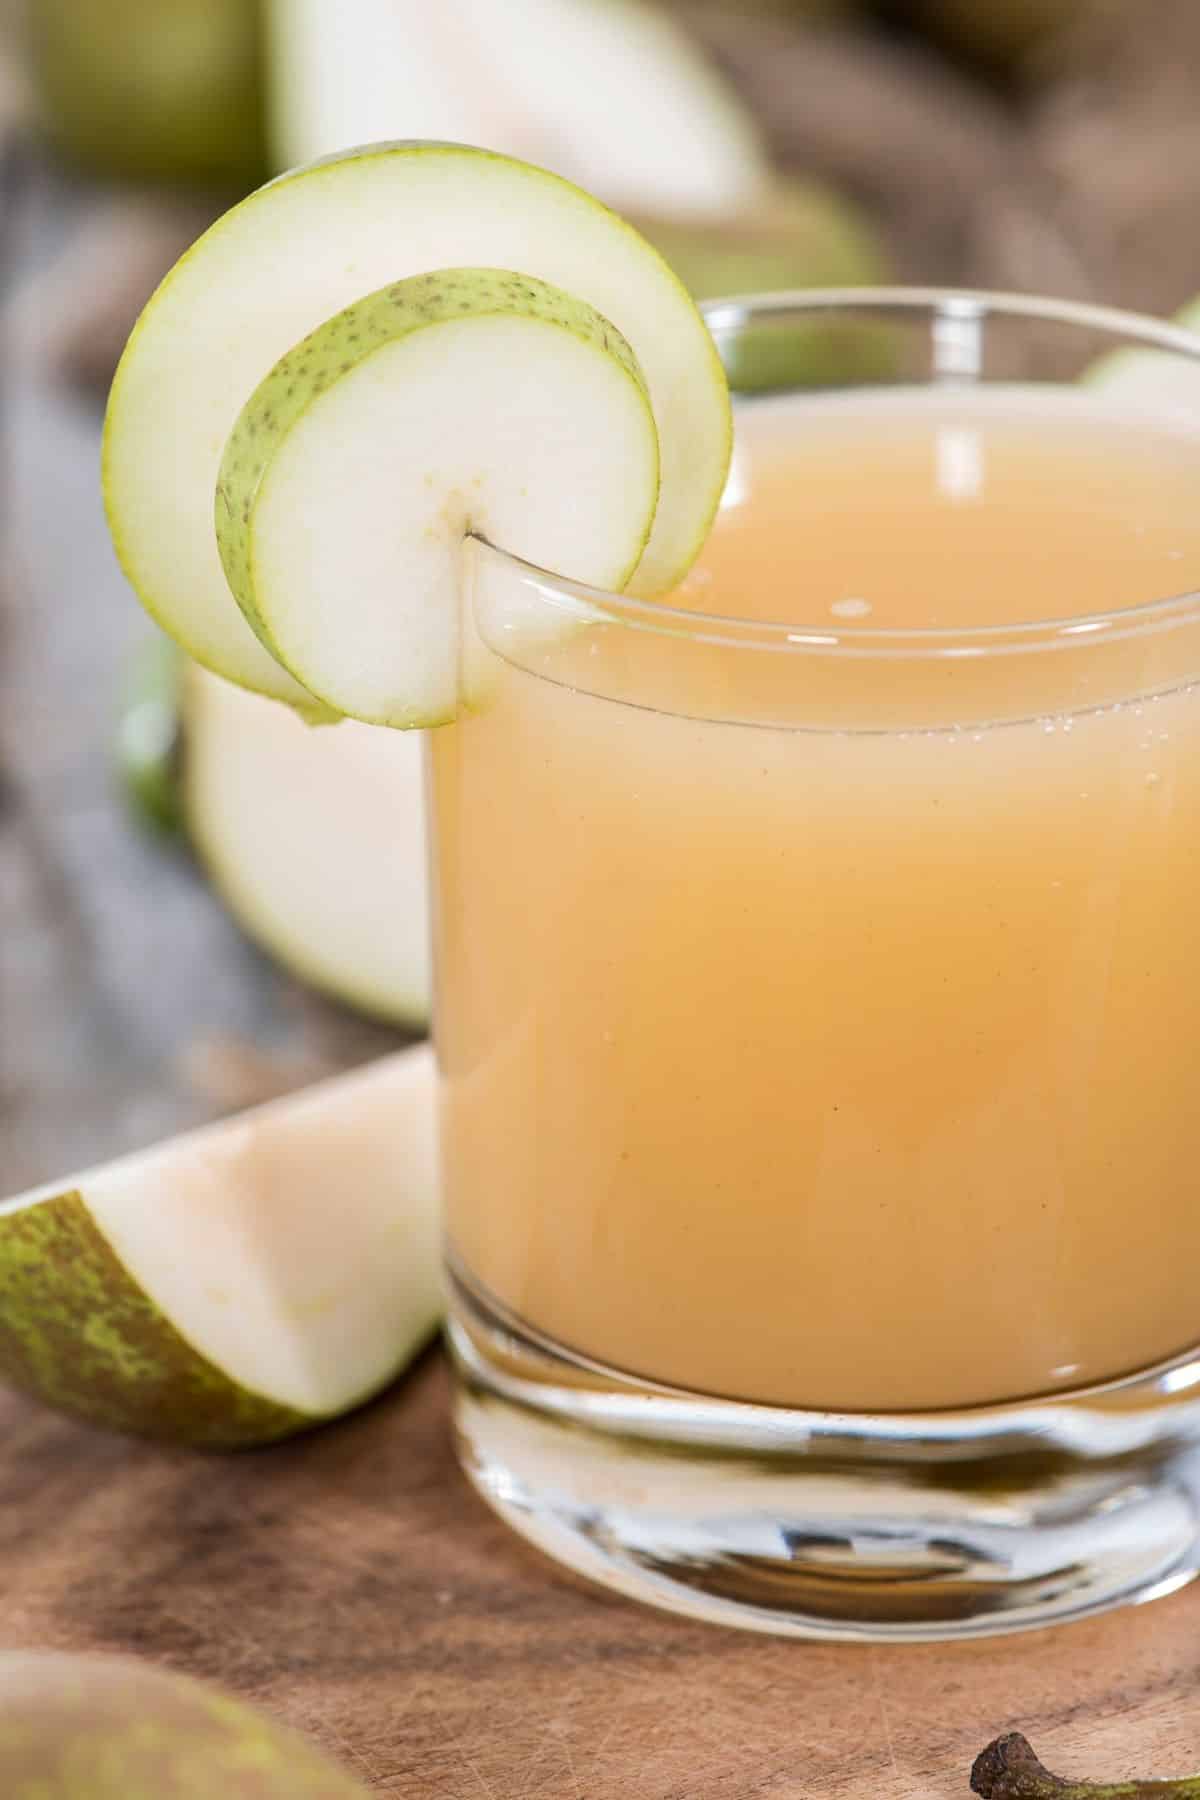 glass of pear juice with a slice of pear on rim.